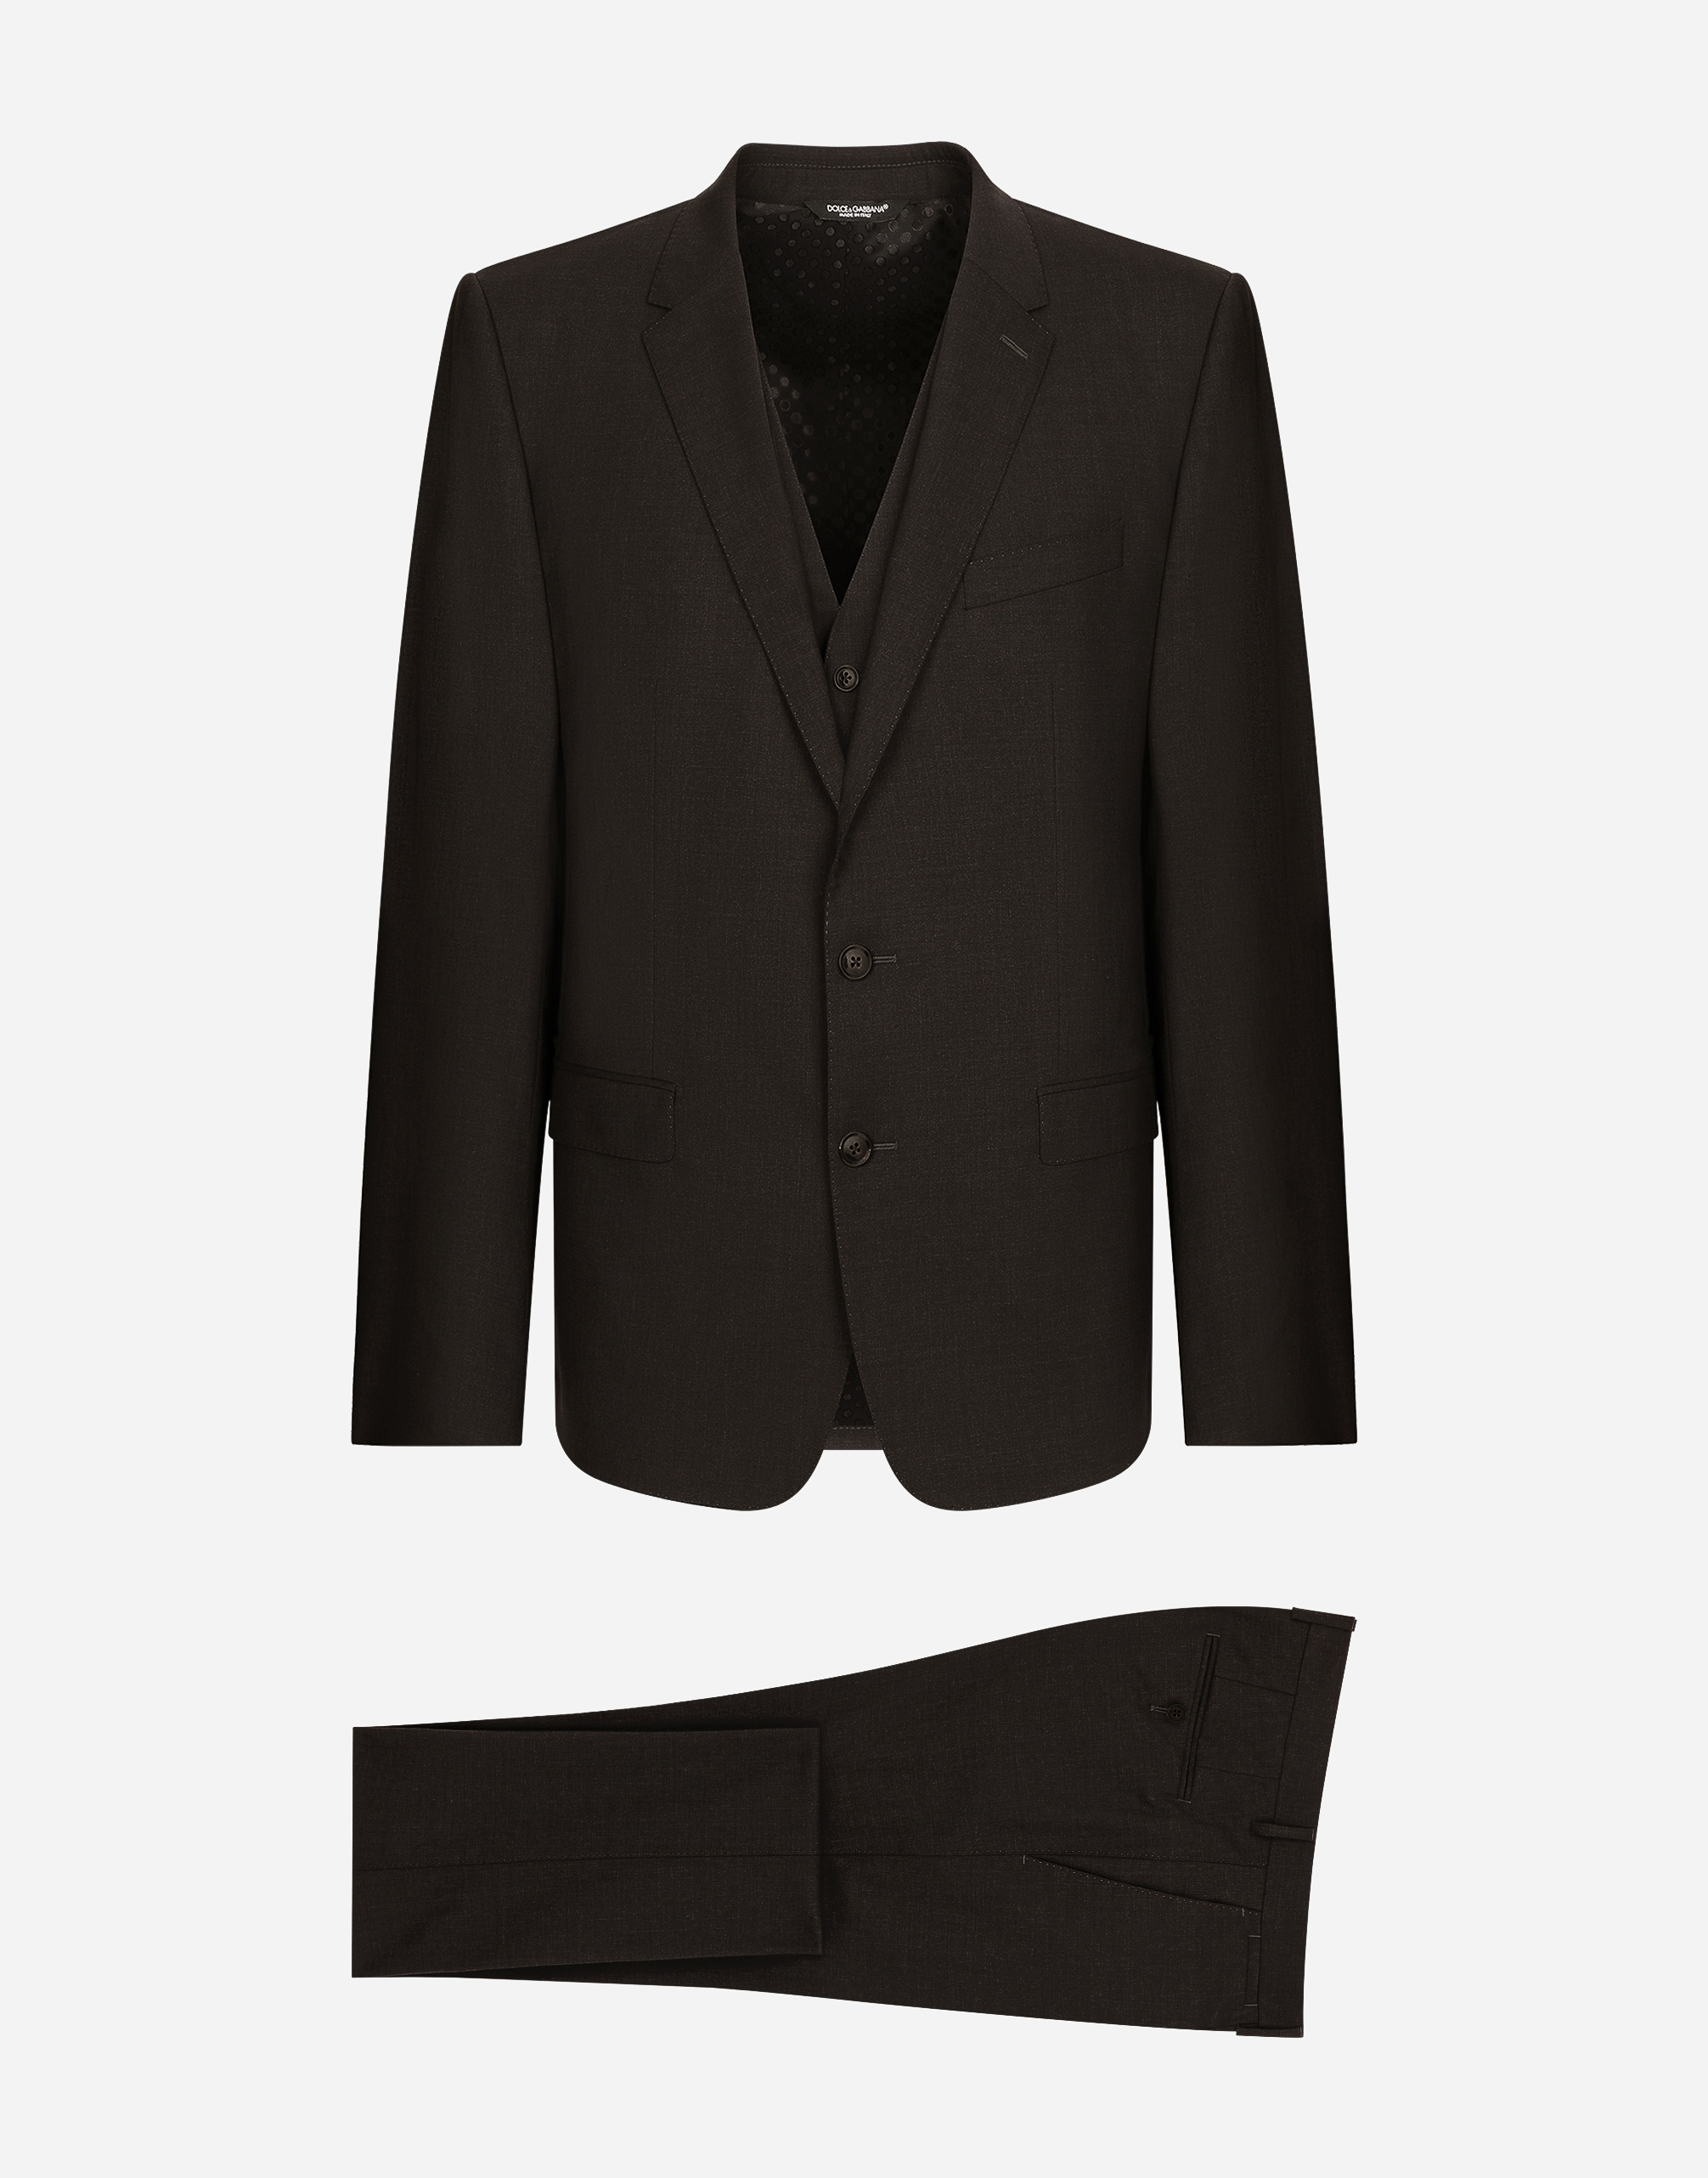 dolce and gabbana suits